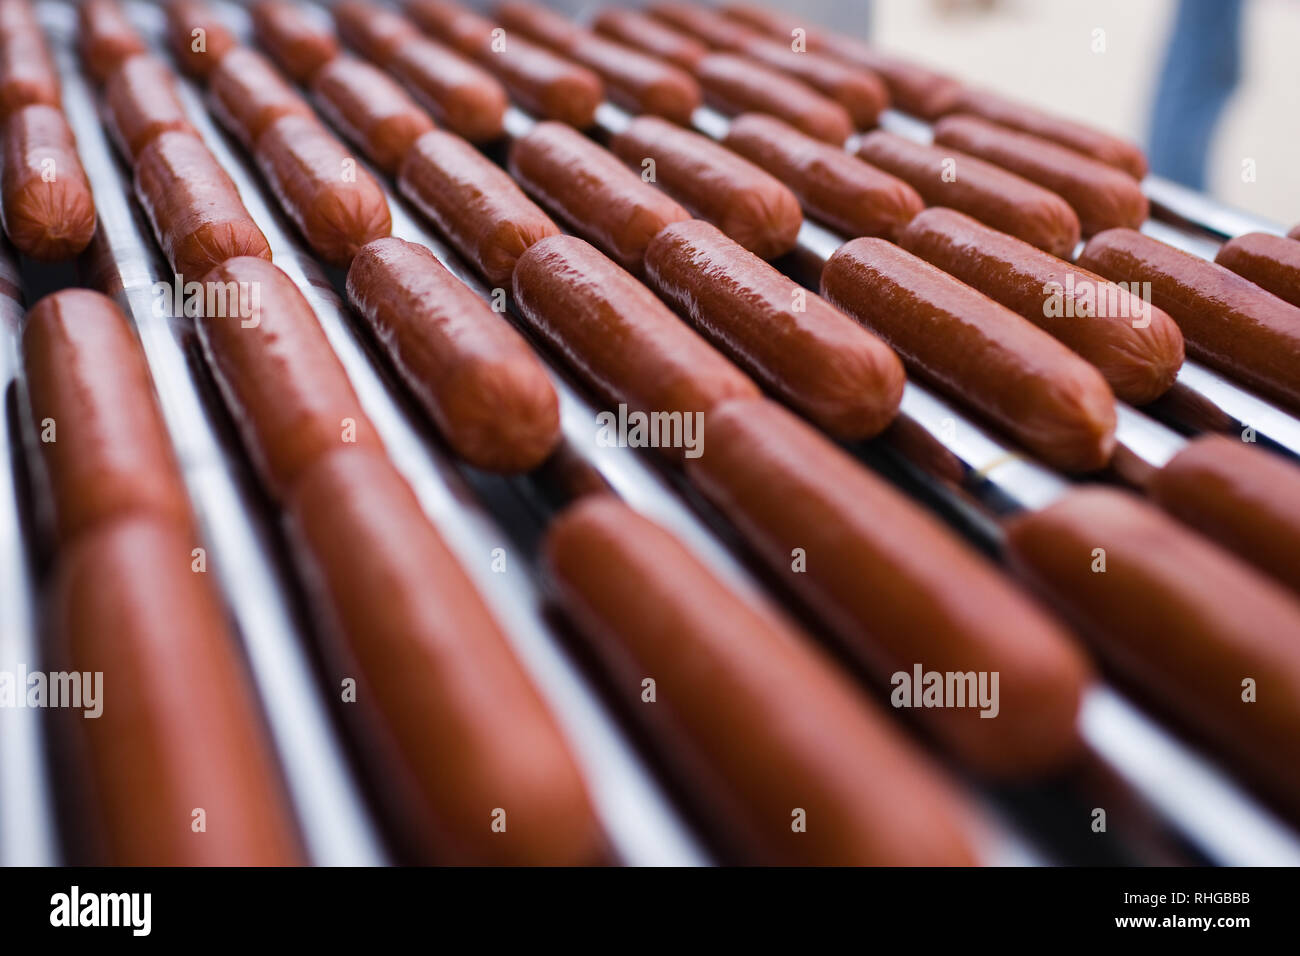 Several hot dogs cooking on a roller machine Stock Photo